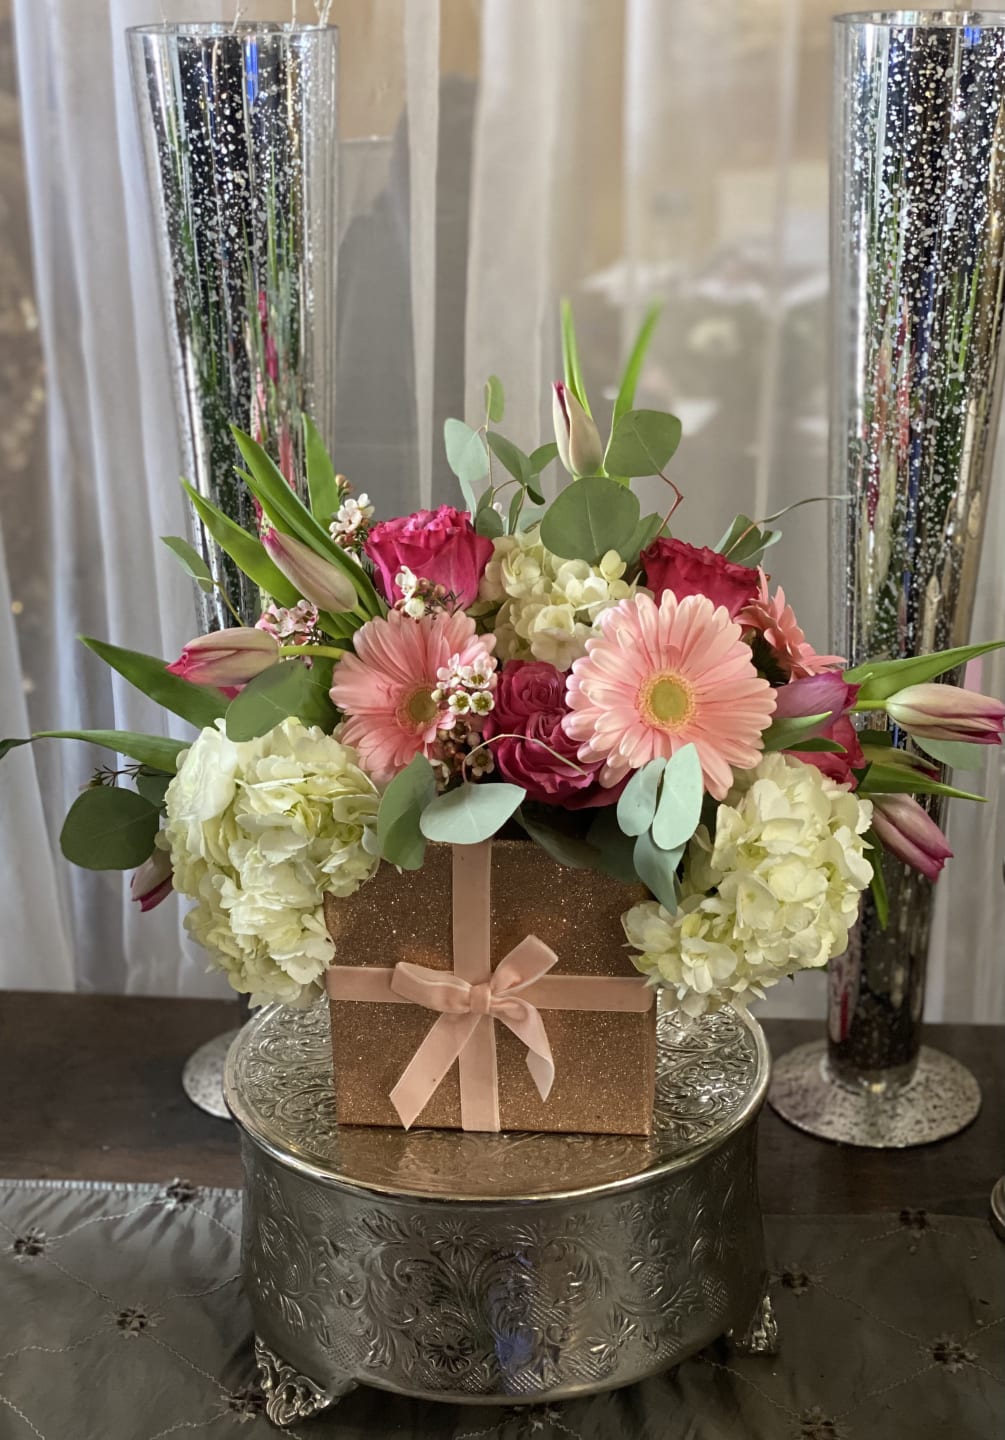 A beautiful modern arrangement in a sparkle present box.
Components may vary. Substitutions